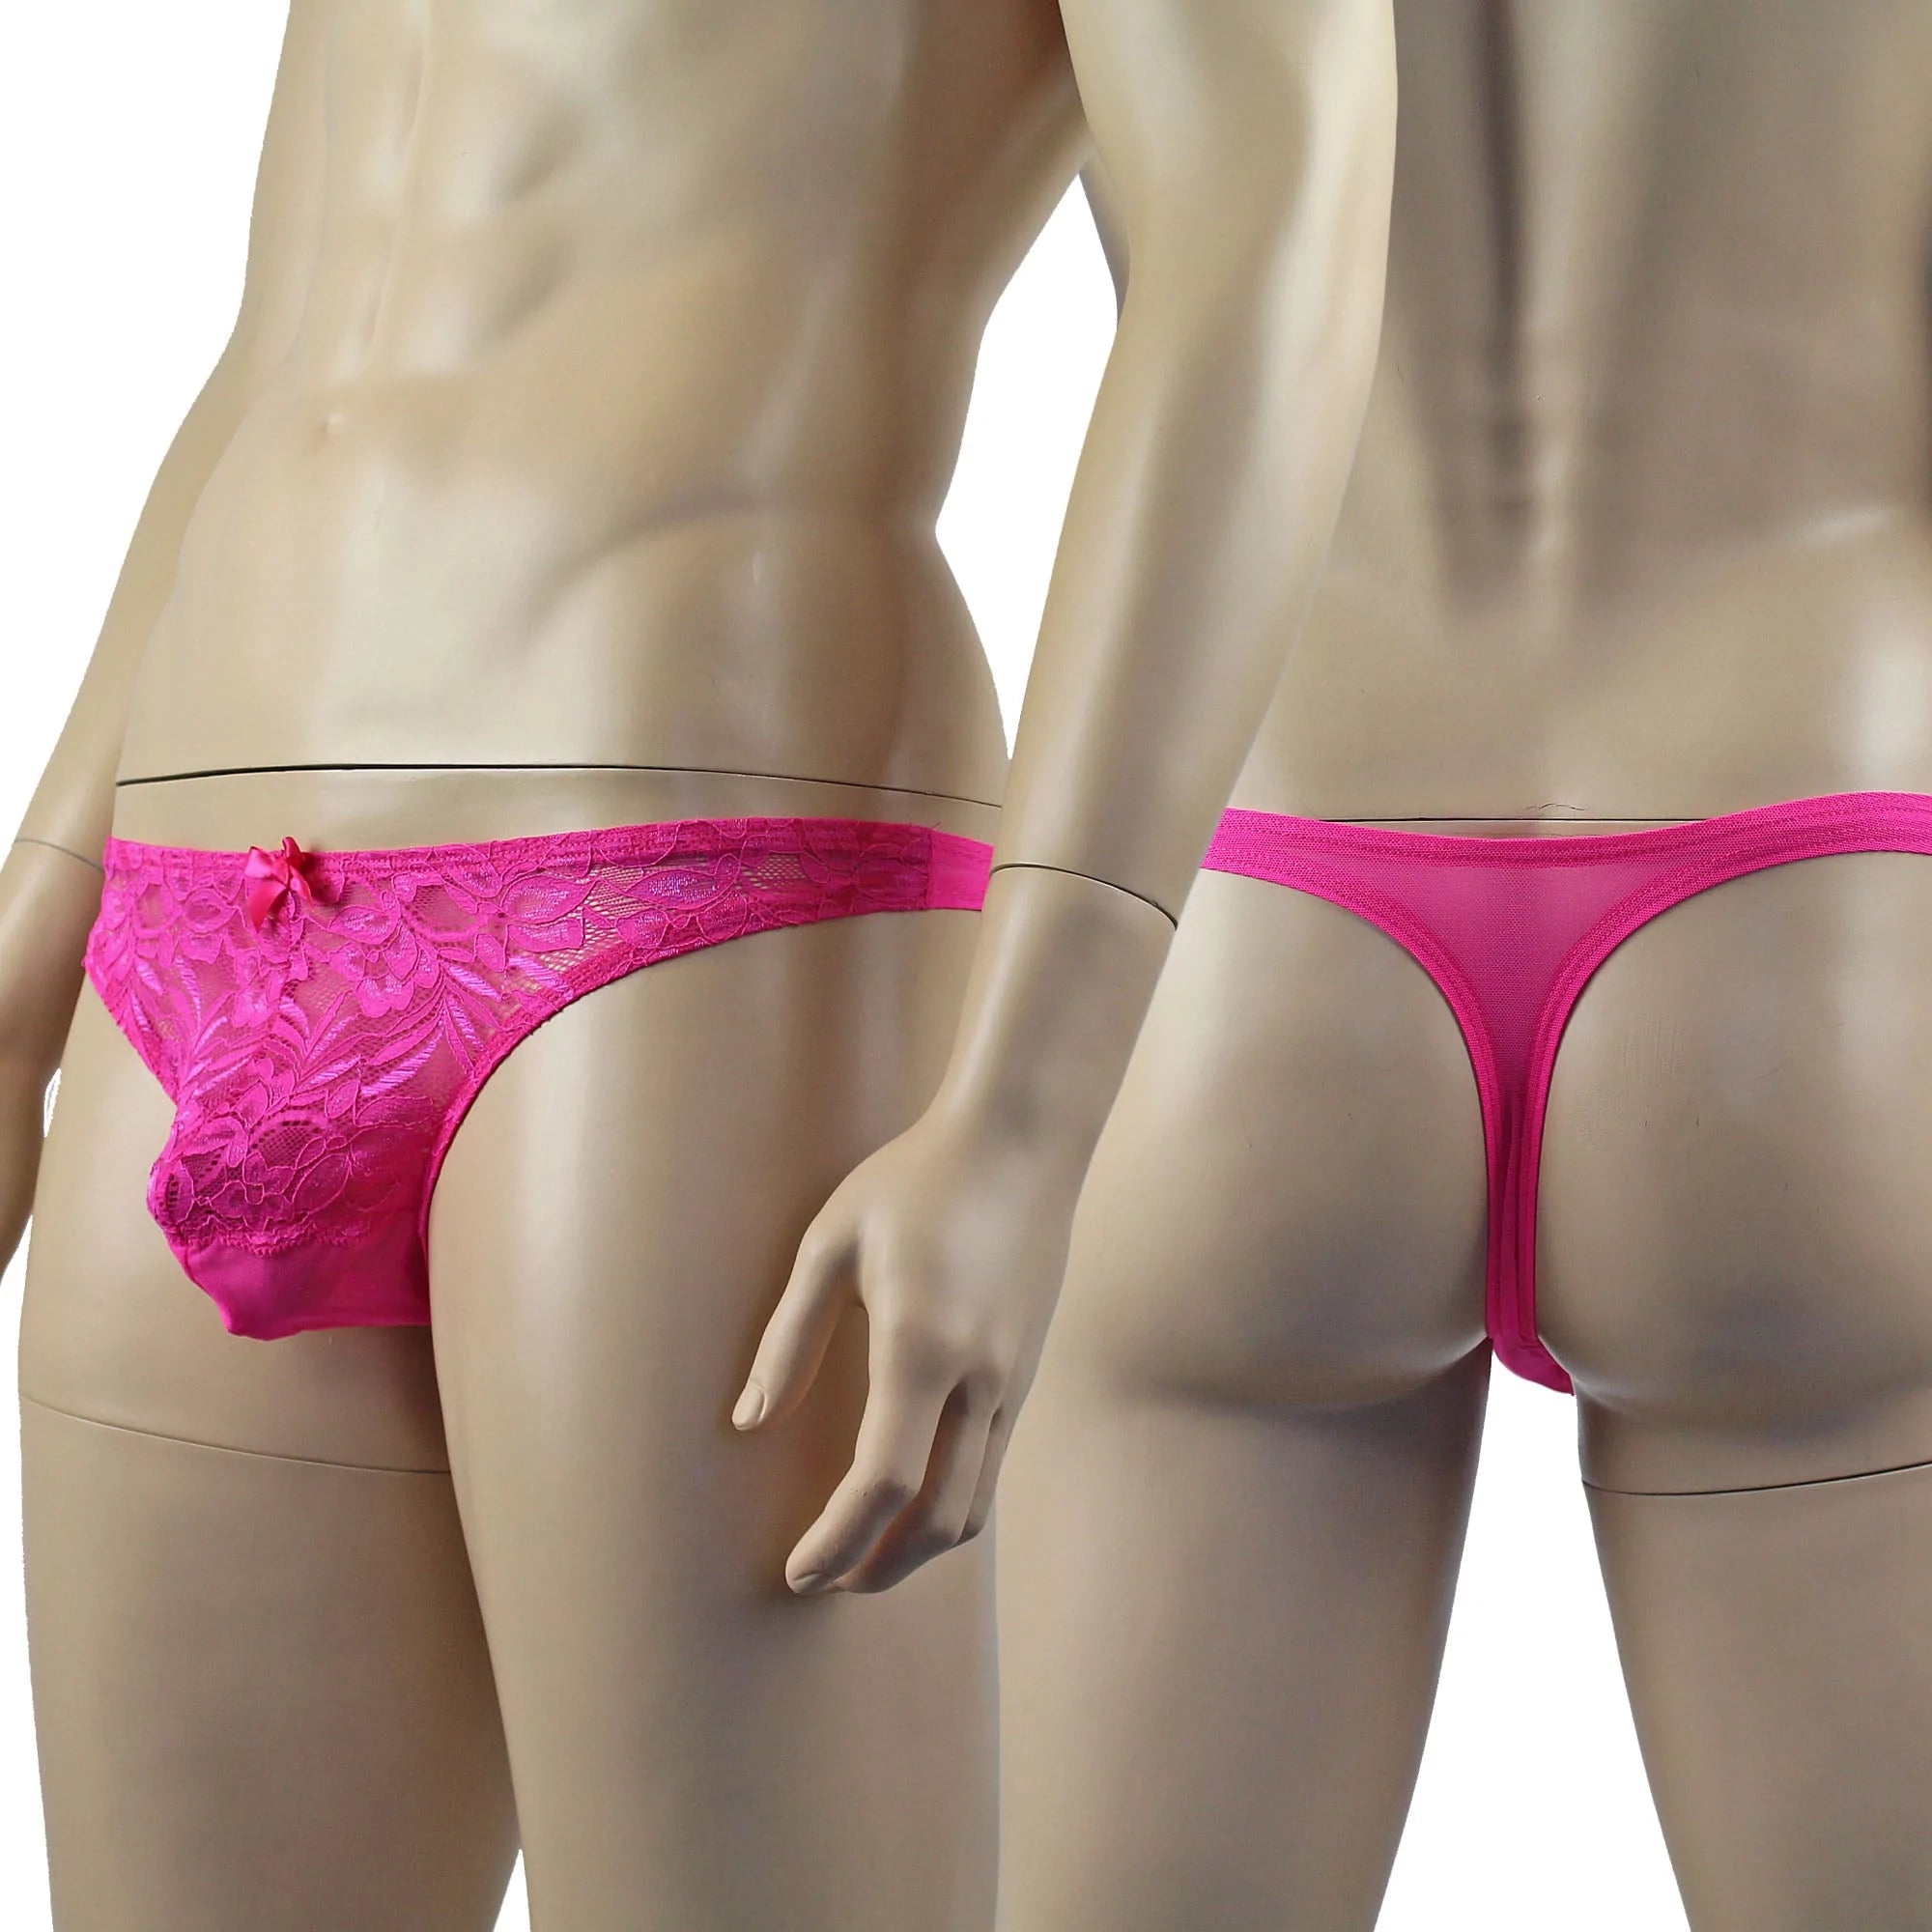 SALE - Mens Kristy Sexy Lace Thong Panties with Stretch Mesh Back Hot Pink